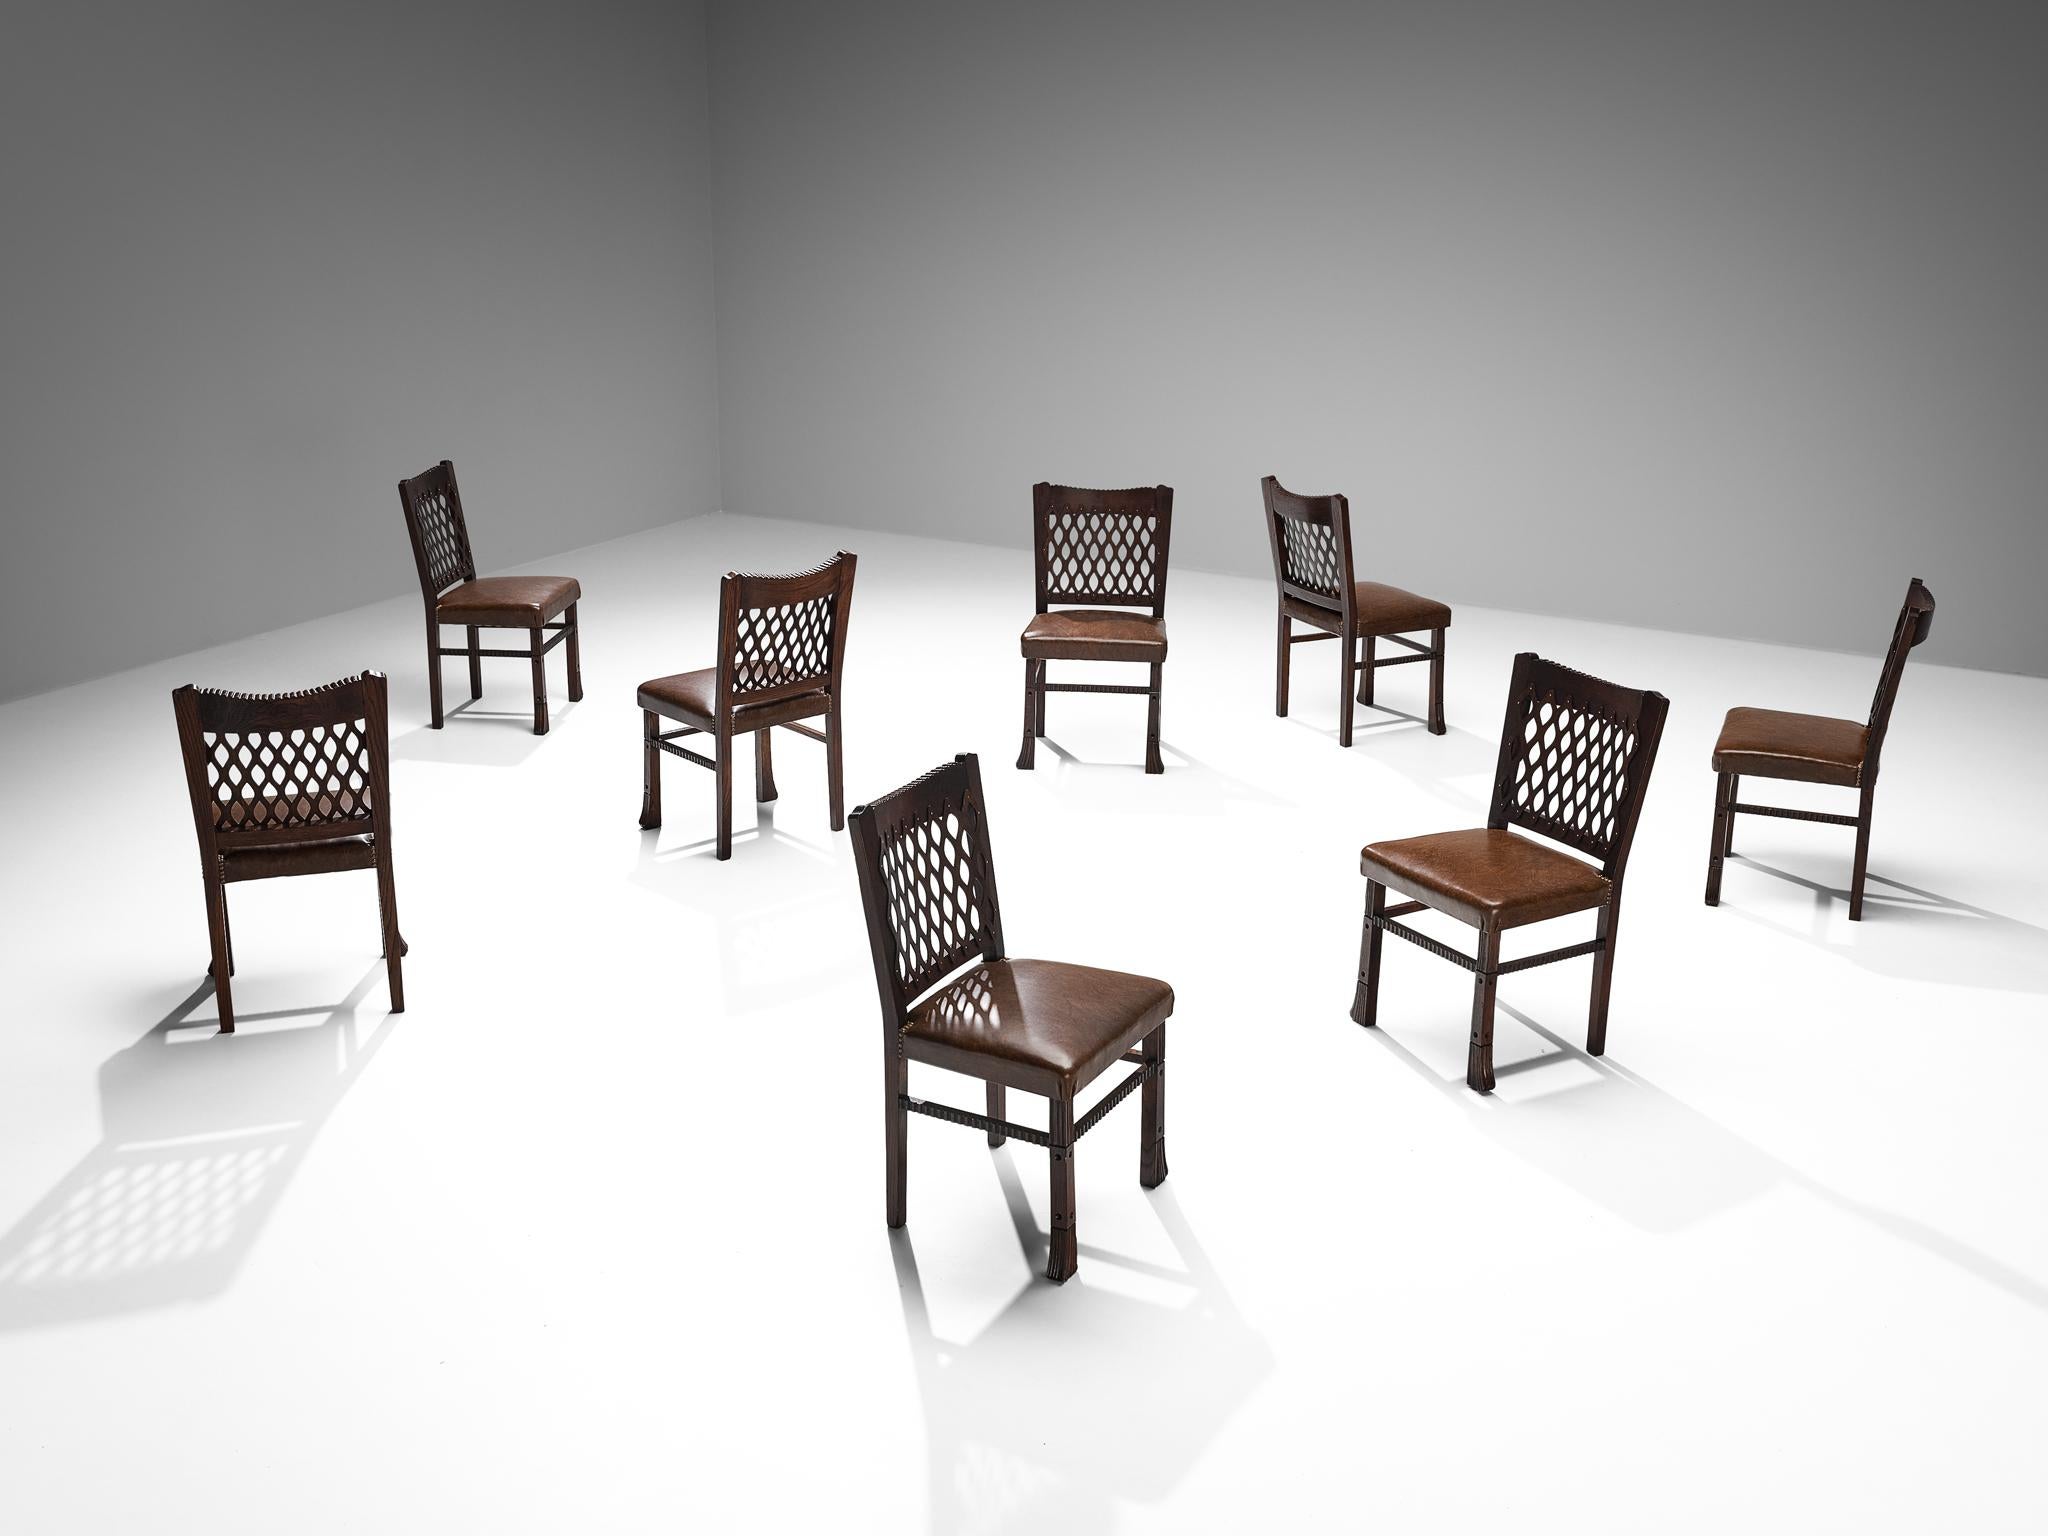 Ernesto Valabrega, set of eight dining chairs, oak, leather, metal, Italy, circa 1935

These well-sculpted chairs are created in one of the most influential periods for the arts namely the Art Deco Movement. The chairs bear witness to the